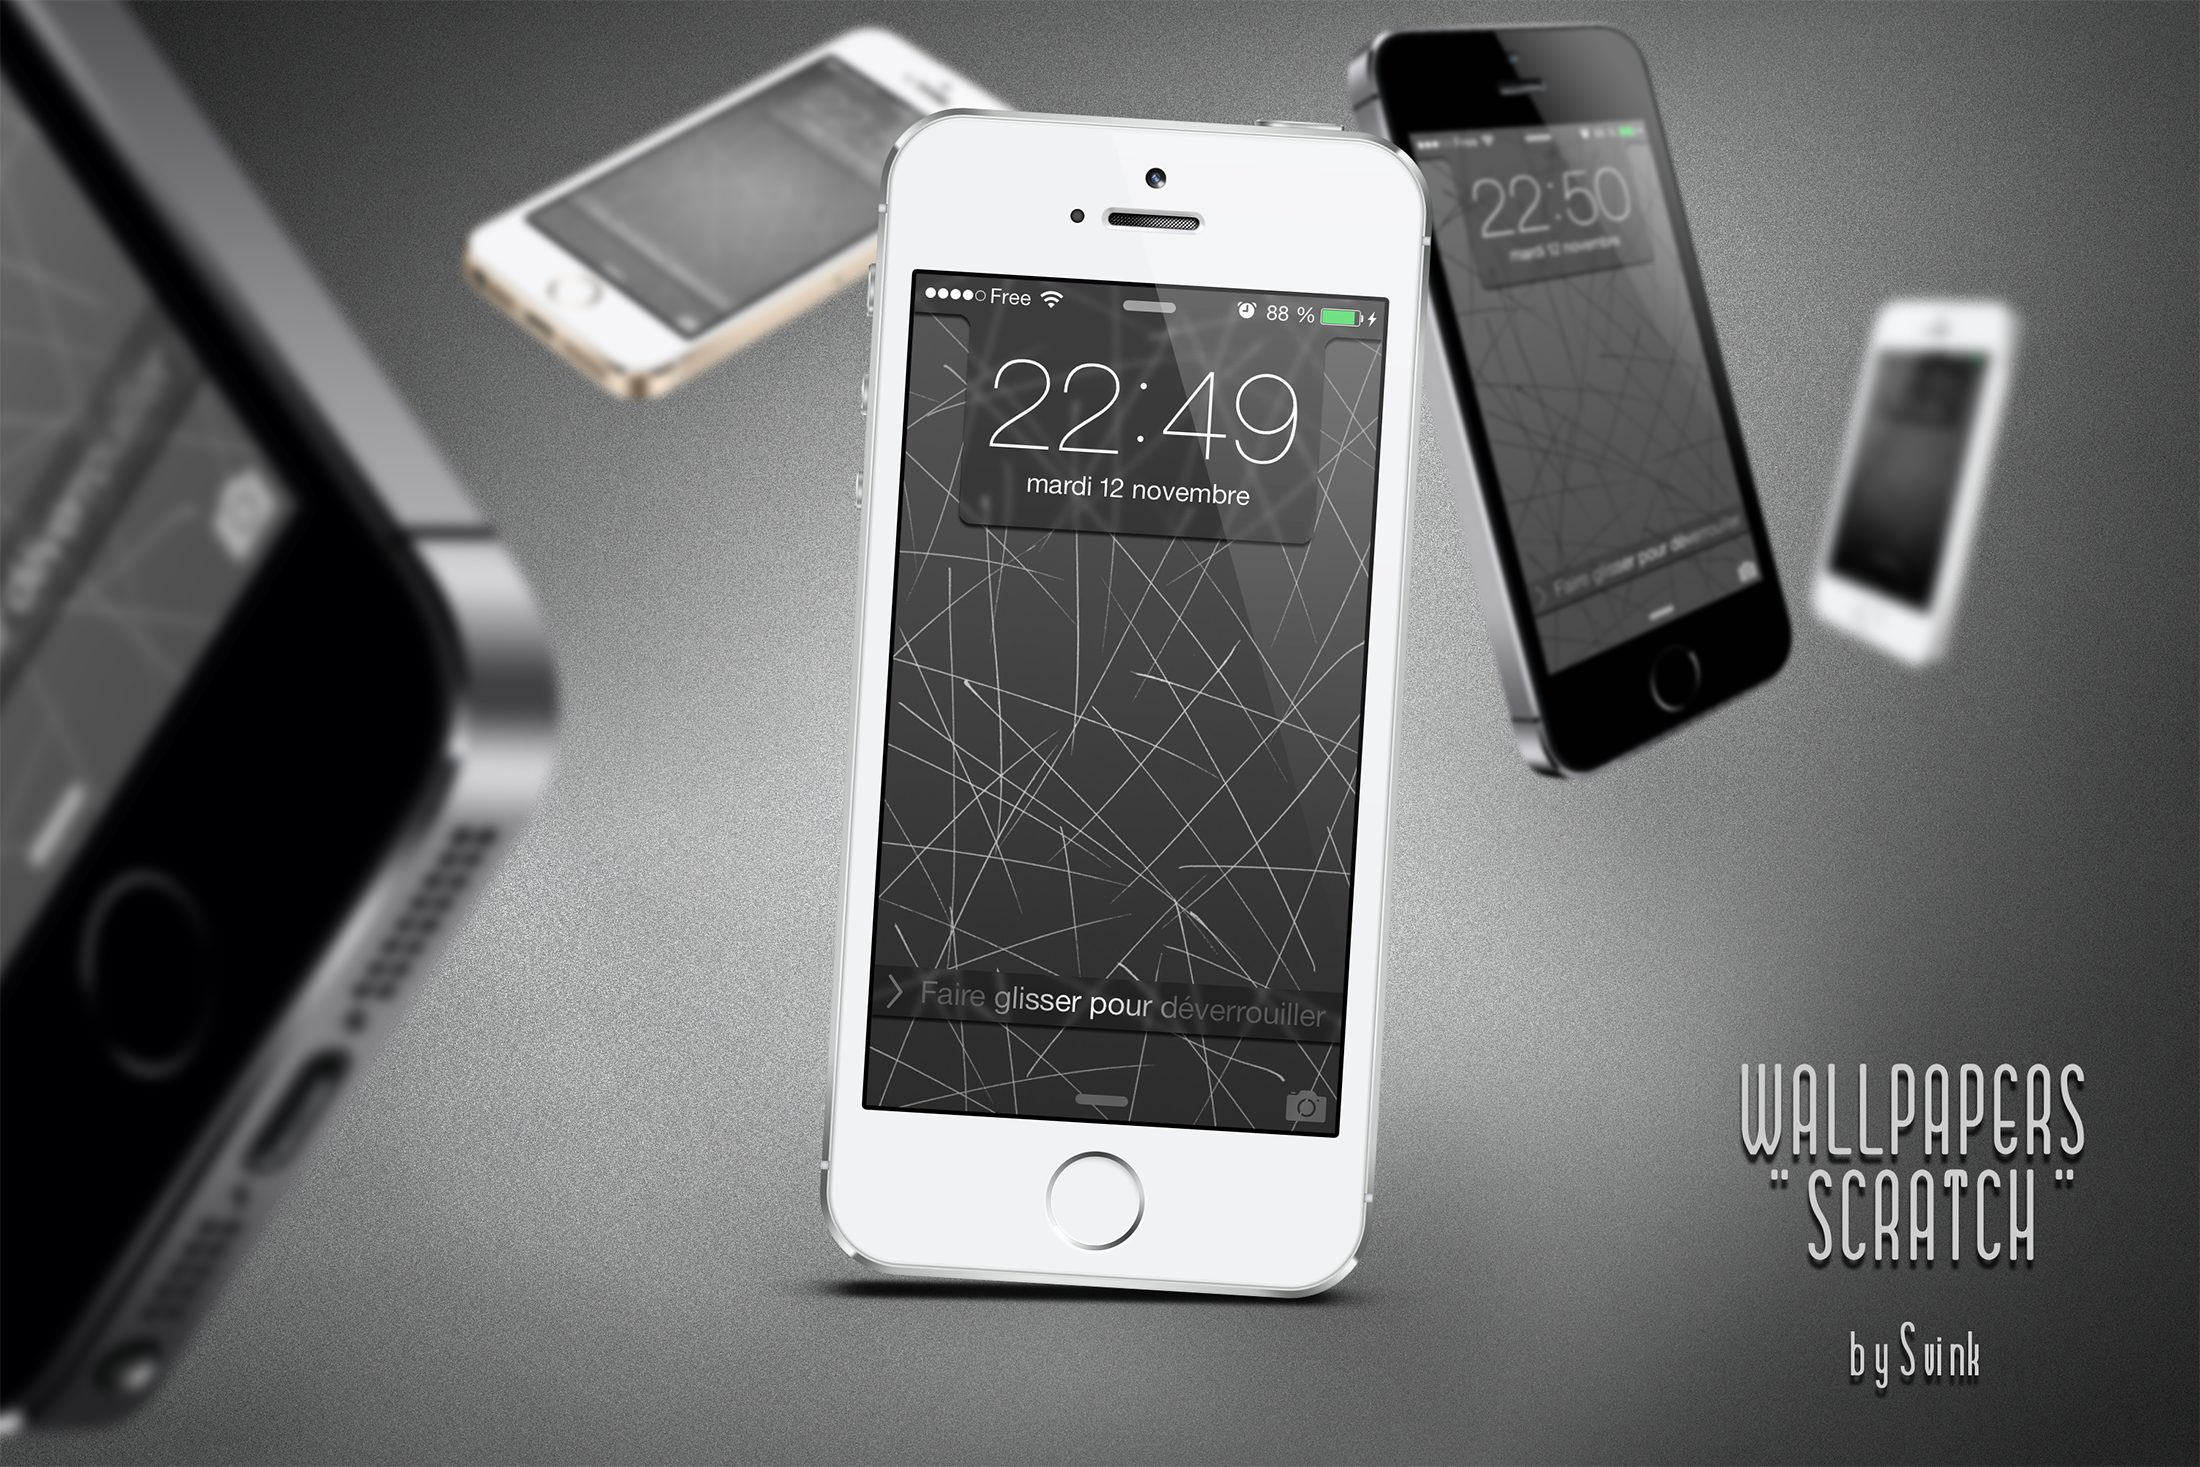 Wallpapers of the week: simplistic scratches